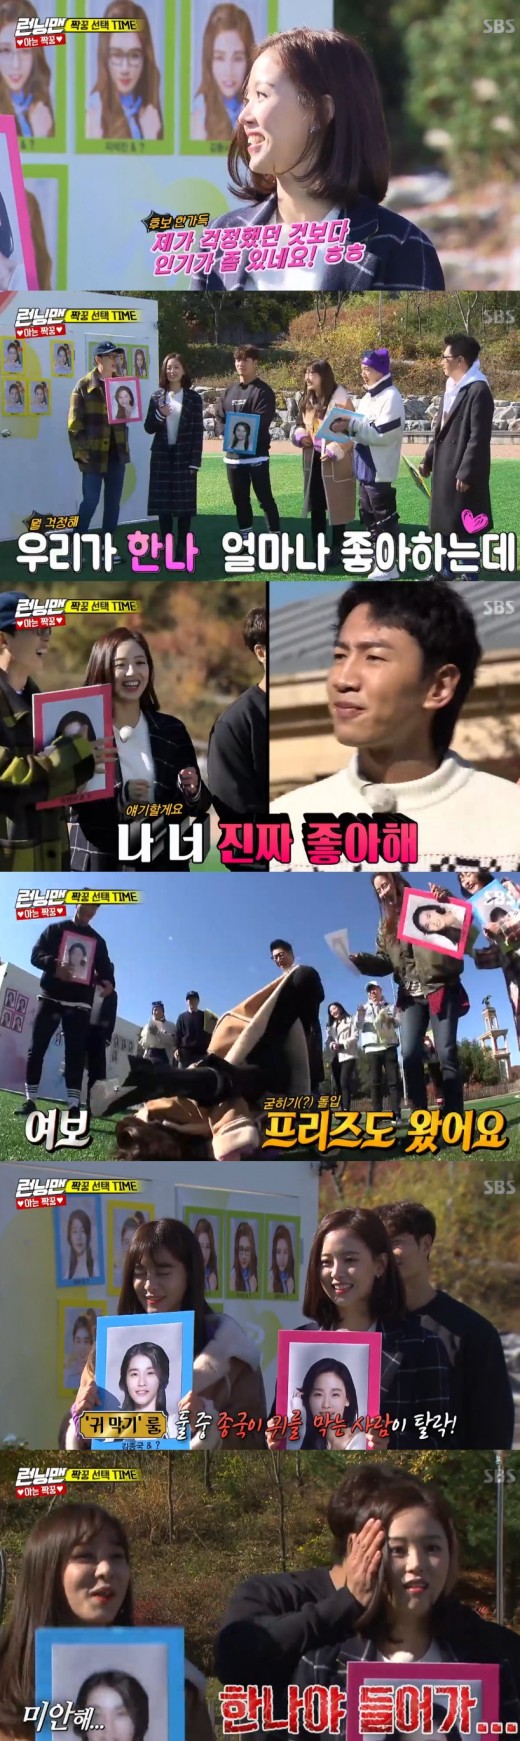 Kang Han-Na once again showed off her artistic sense with her performance as Jun Running Man.On SBSs Running Man on the 18th, Irene Joy, Kang, and Seol In-ah appeared as guests as a special feature of Knowing Pair.Haha and Kim Jong Kook are trying to be strong partners, and they have appealed to themselves by posting memories of the Family Project.At the time, I showed off my sense of entertainment by showing off the anti-war artistic sense and overturning the Image on the screen. Yoo Jae-Suk called me such a strong person as a star who was raised by Running Man.Kang Han-Na also recalled that she almost tears at the time, and Kang Han-Na also received the Choicess of Haha and Kim Jong-guk, saying, It is more popular than I was worried about.I knew there was no one and I wanted to do something. Lee Kwang-soo said, I like you all, its a Confessionss. I laughed at the fact that I was hit by a wall, saying, I have a lot of back hair.Kang Han-Na chose Kim Jong-guk, saying, Someone wants to make a friend. Kim Jong-guk was delighted, but they were not paired up.Seol In-ah also raised a strong objection, saying that he would like to pair with Kim Jong-guk.Seol In-ah expressed regret that she was not able to join the Family Project. Seol In-ah confessed that she was especially envious of Lee Da-hee and said, I came out on the same day as me. I was really envious.At that time, Seol In-ah lamented, How do you win that?On this day, Seol In-ah showed his motivation by showing Mustang Frieze to shake off the pain of the time. He also actively courted Kim Jong-kook to get his Choicess.As a result, Seol In-ah stood as a winner with Kim Jong-kooks Choicess.On the contrary, I was laughing when Haha, who was paired at the time of the family project, was partnered again.